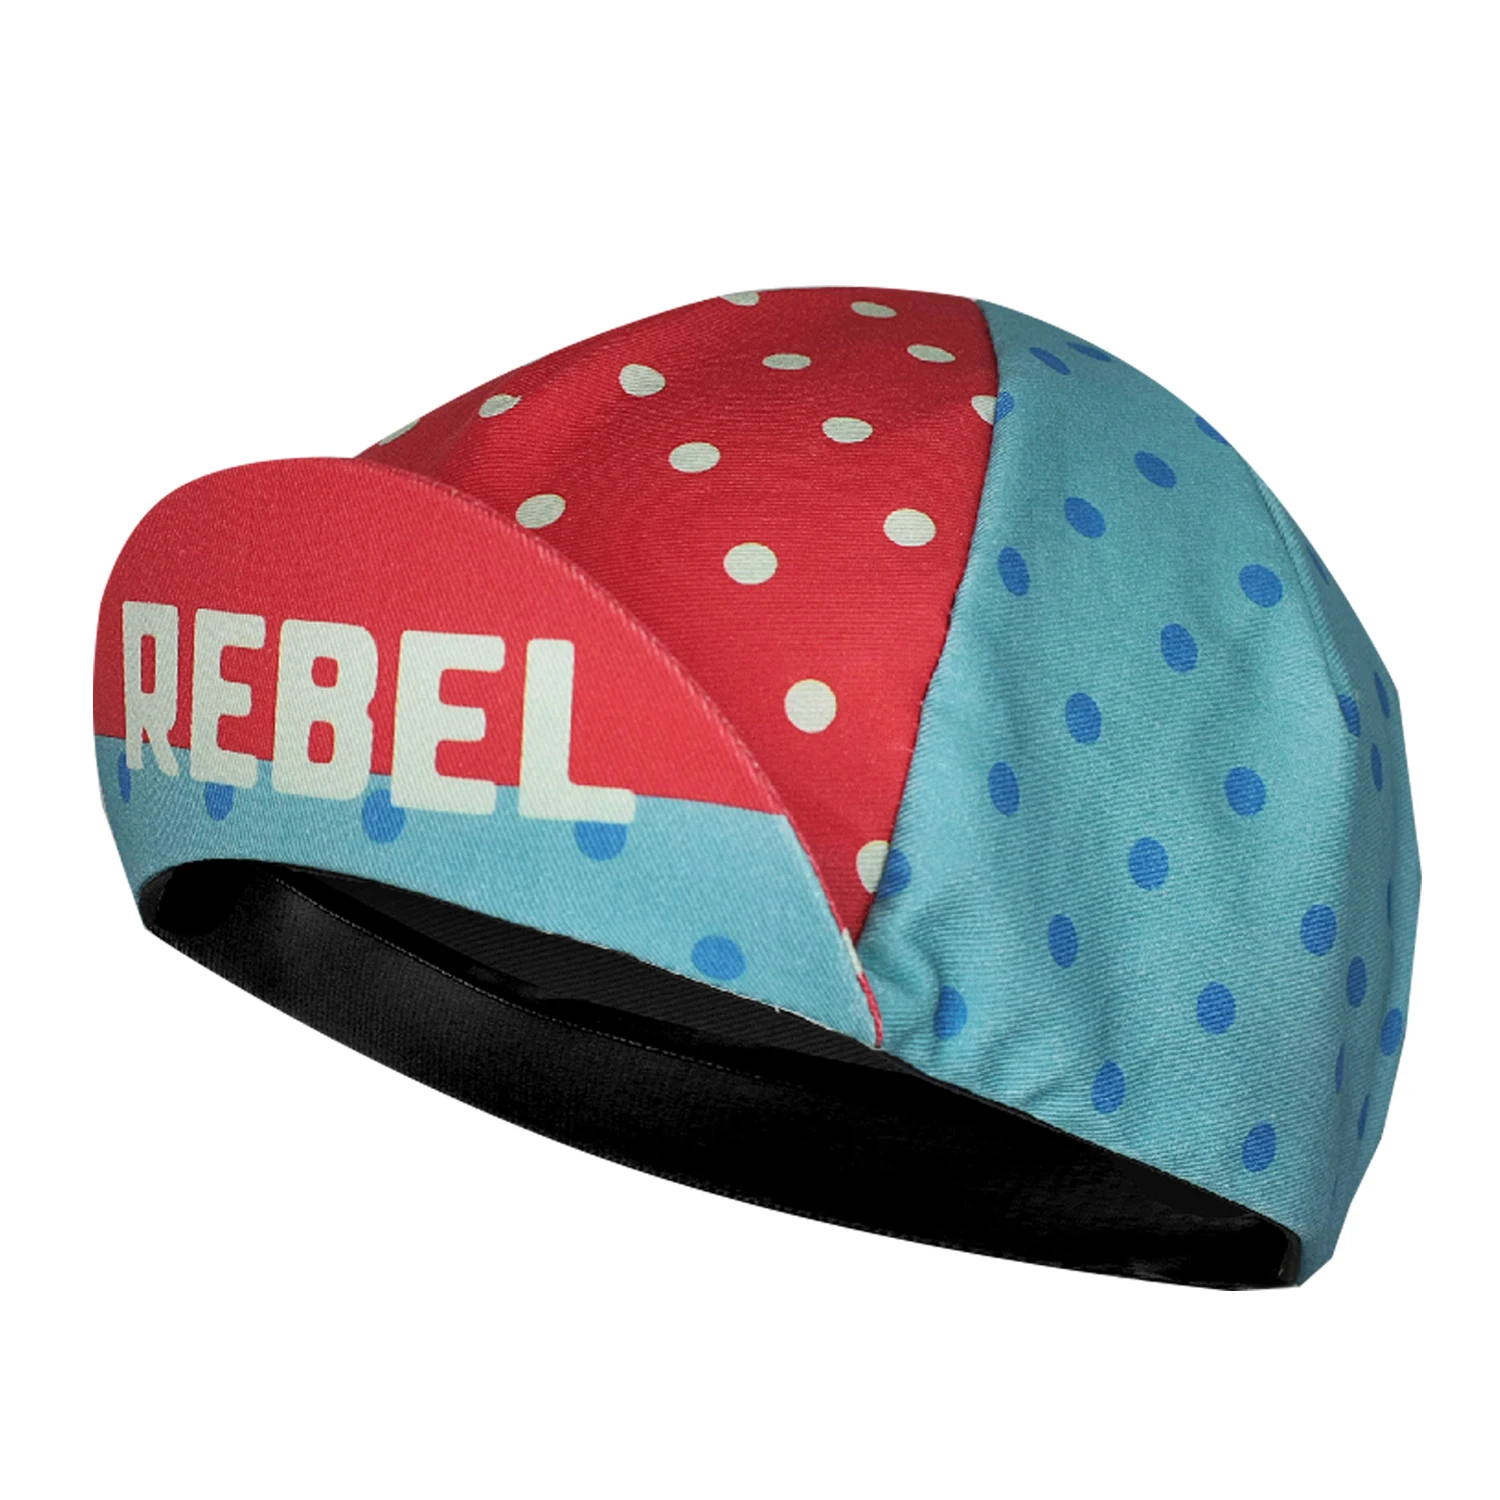 Classic Combination Of Red And Blue White Dot Polyester Cycling Caps Moisture Wicking Quick Dry Sports Balaclava Unisex Bike Hat